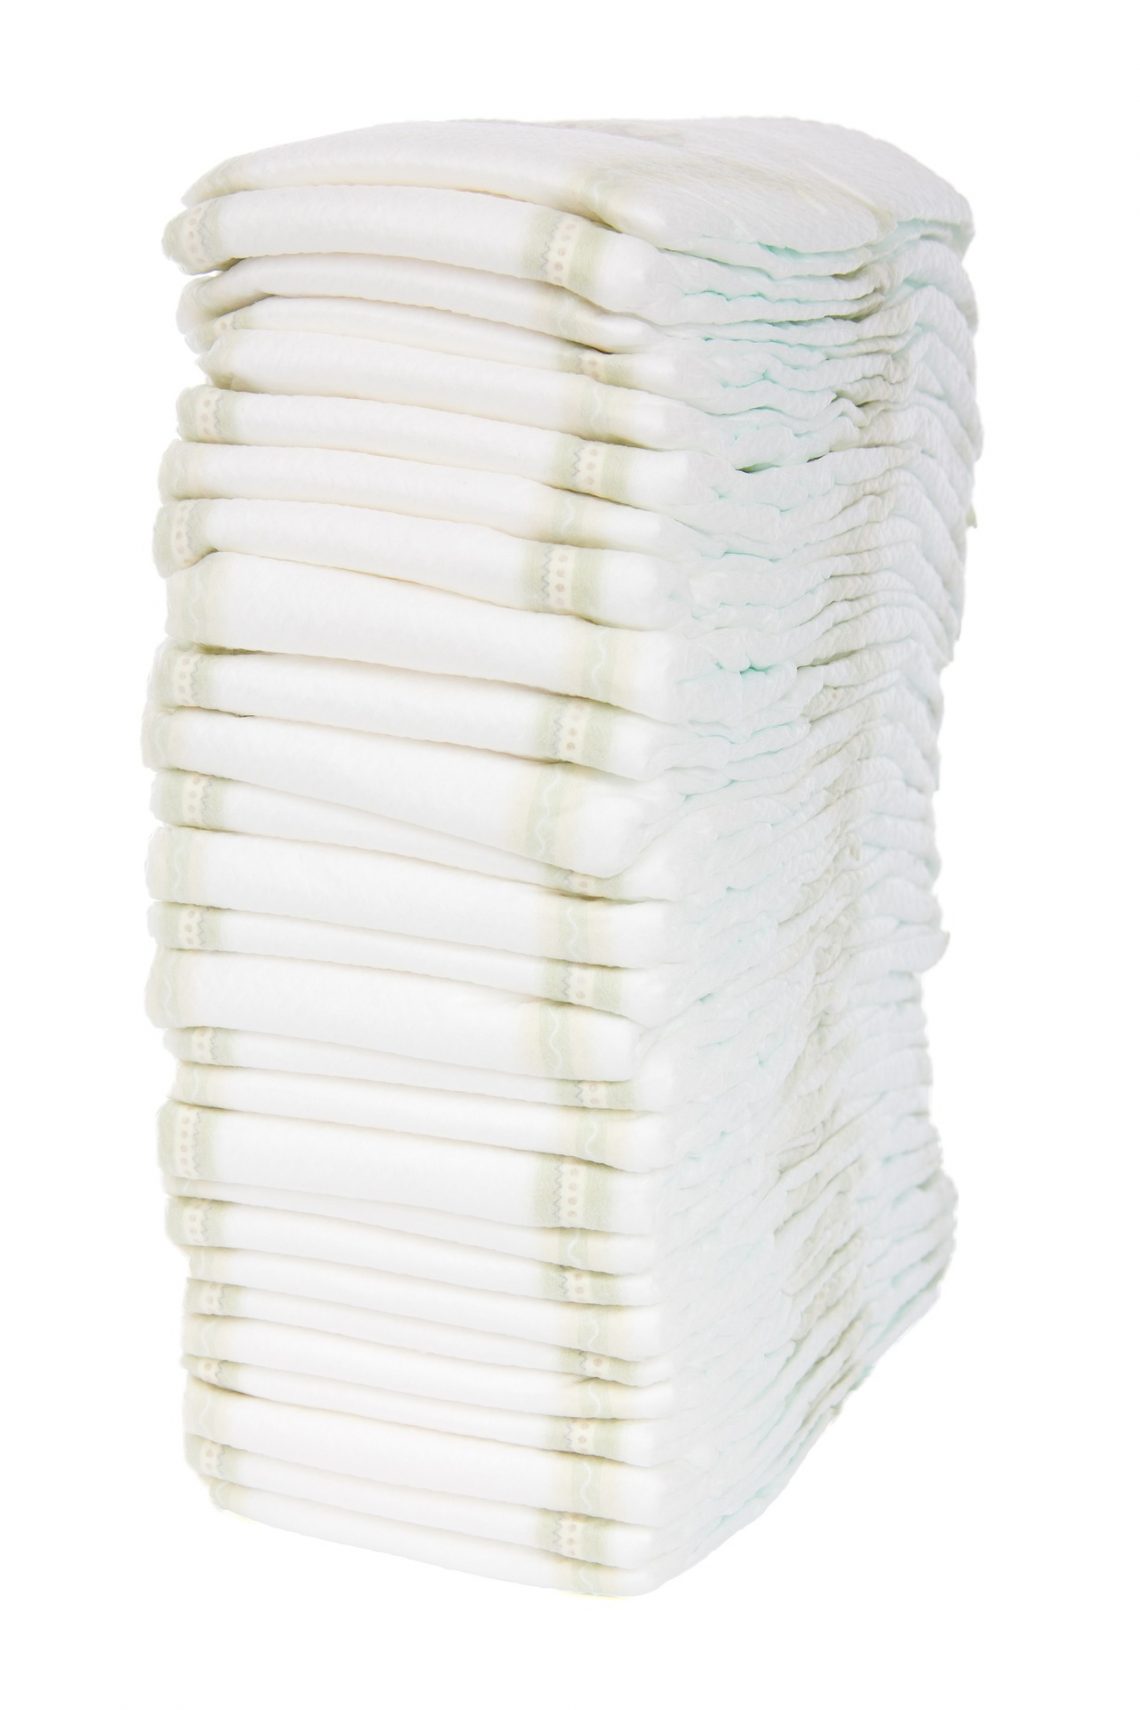 Everything You Need To Know About Disposable Bed Pads